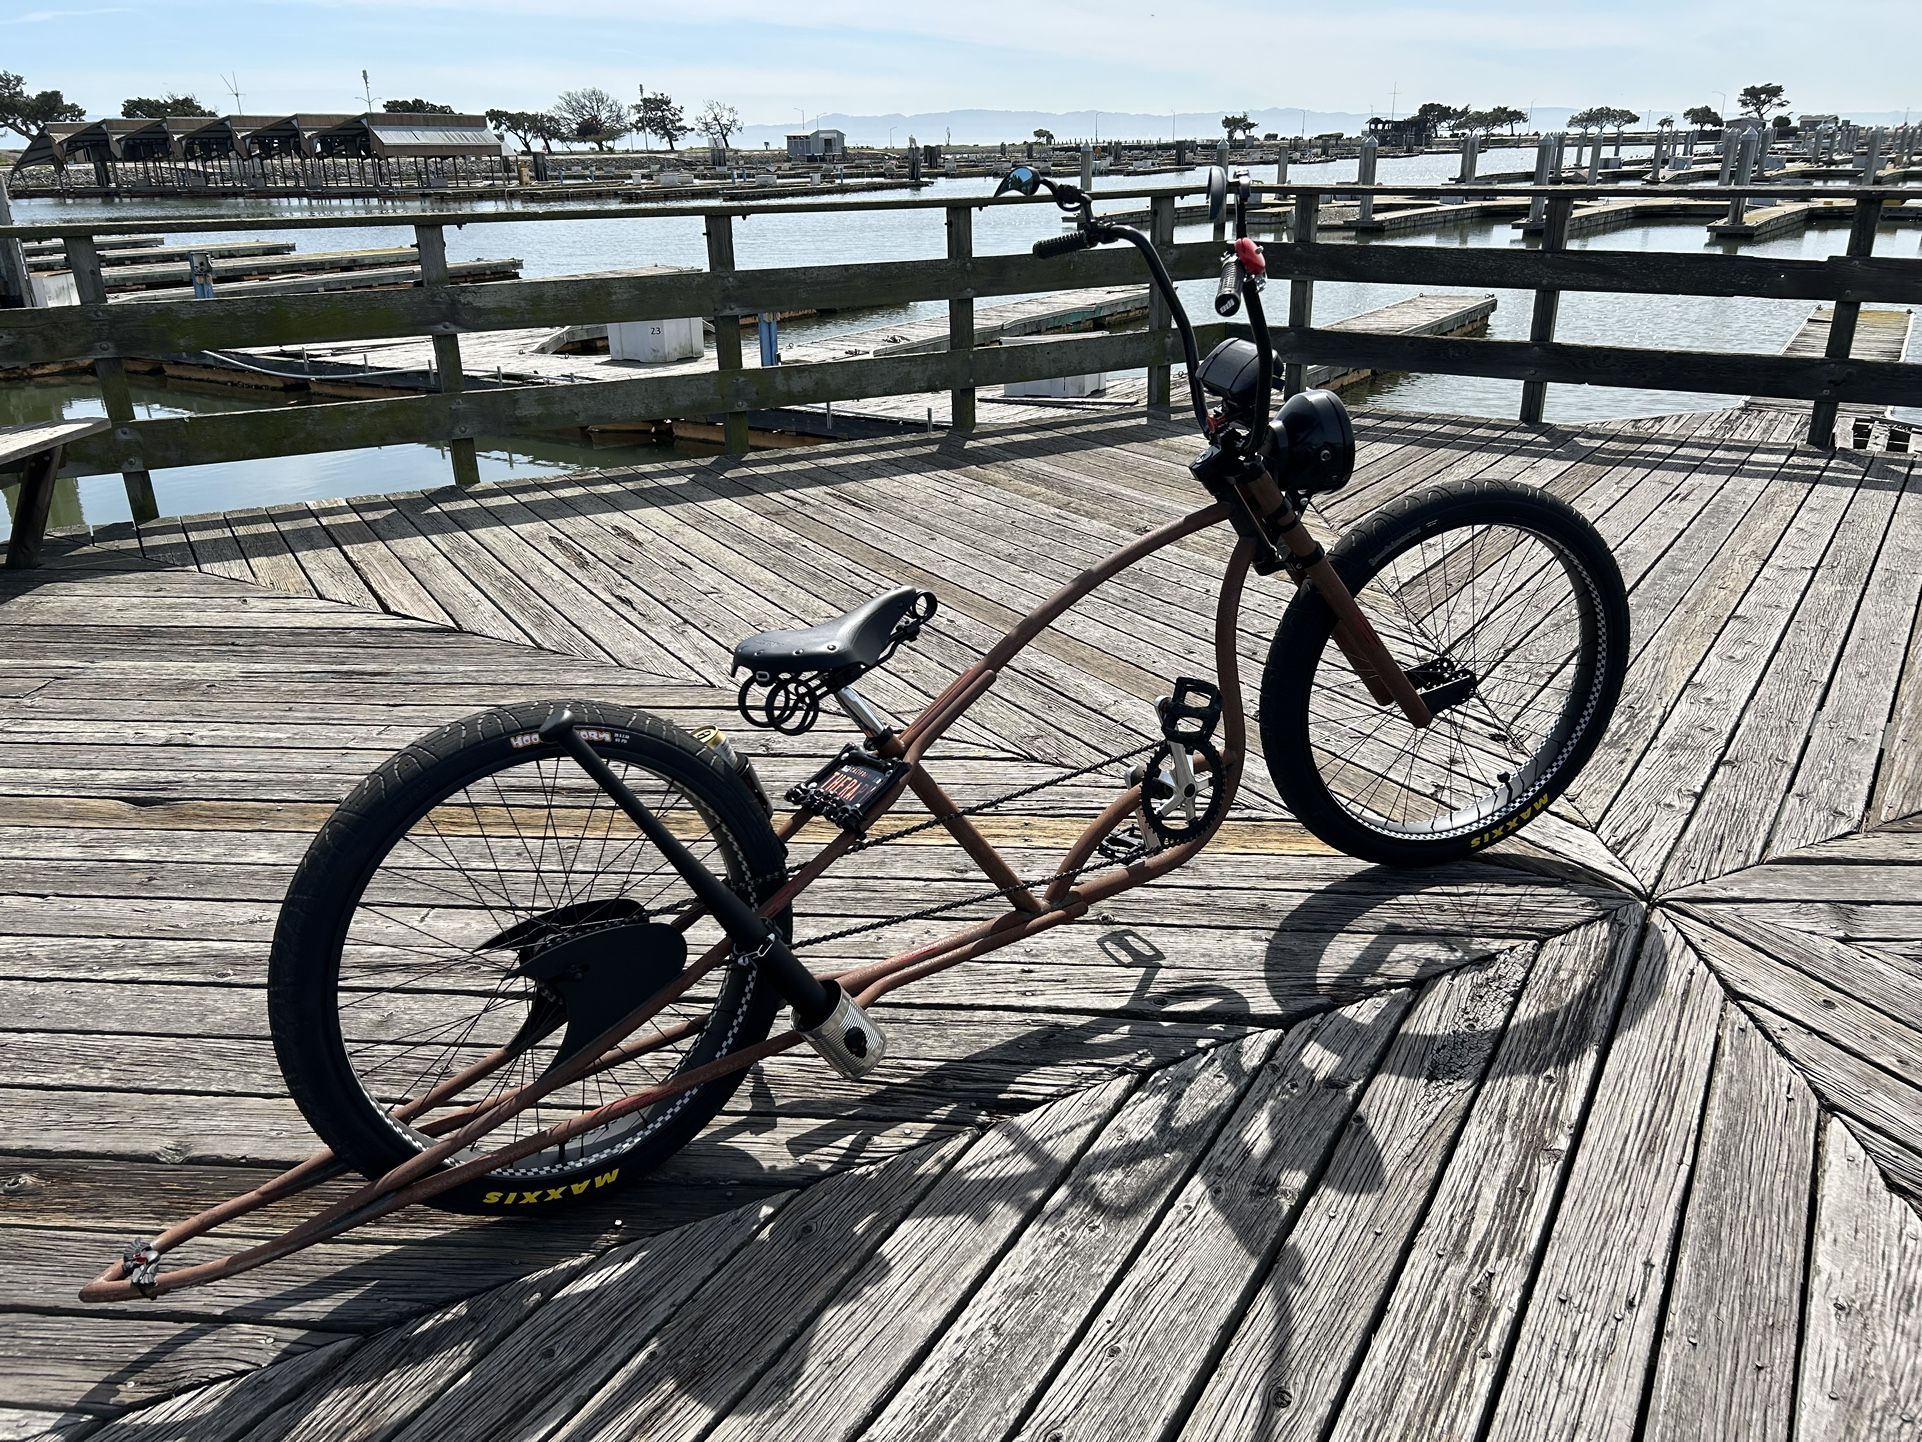 Ruff Cycles Streaminer(super Stretched Cruiser)